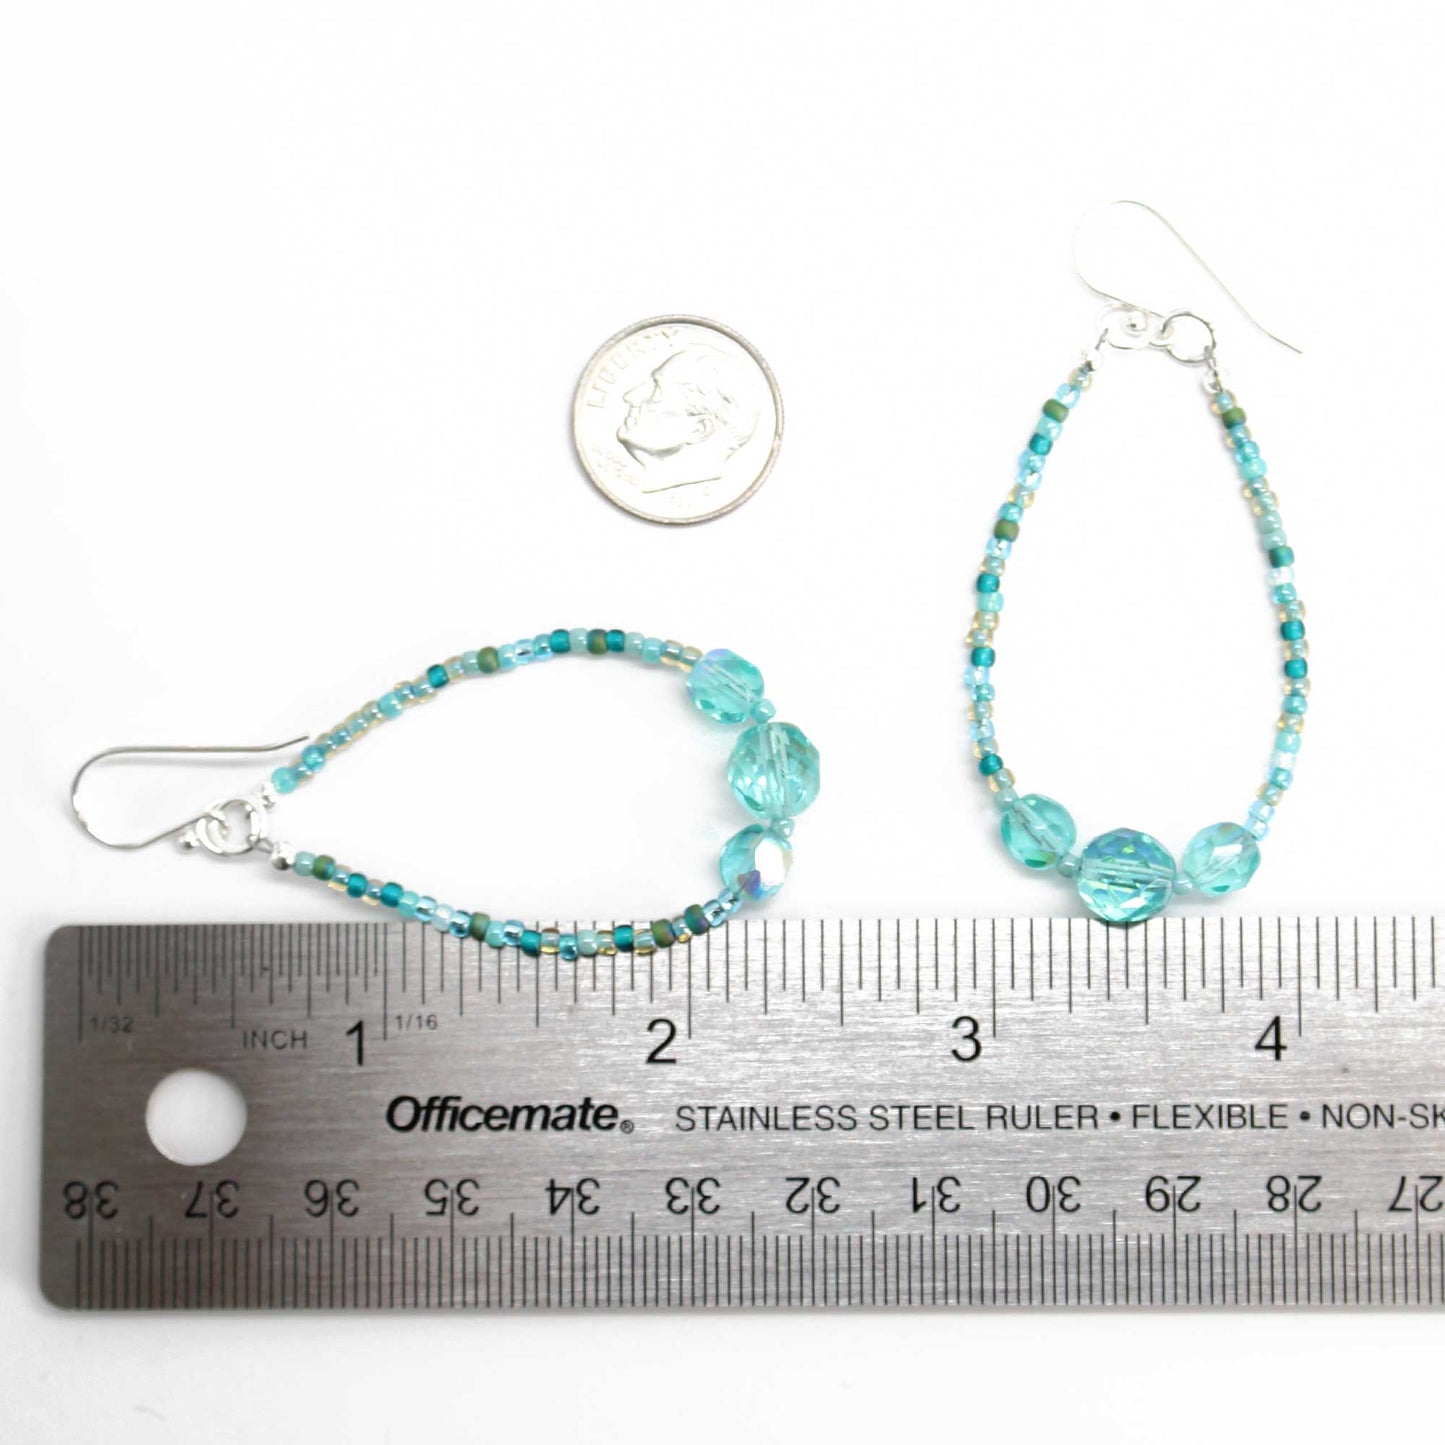 35 Brick Stitch Earrings or Charms Beading Pattern Collection